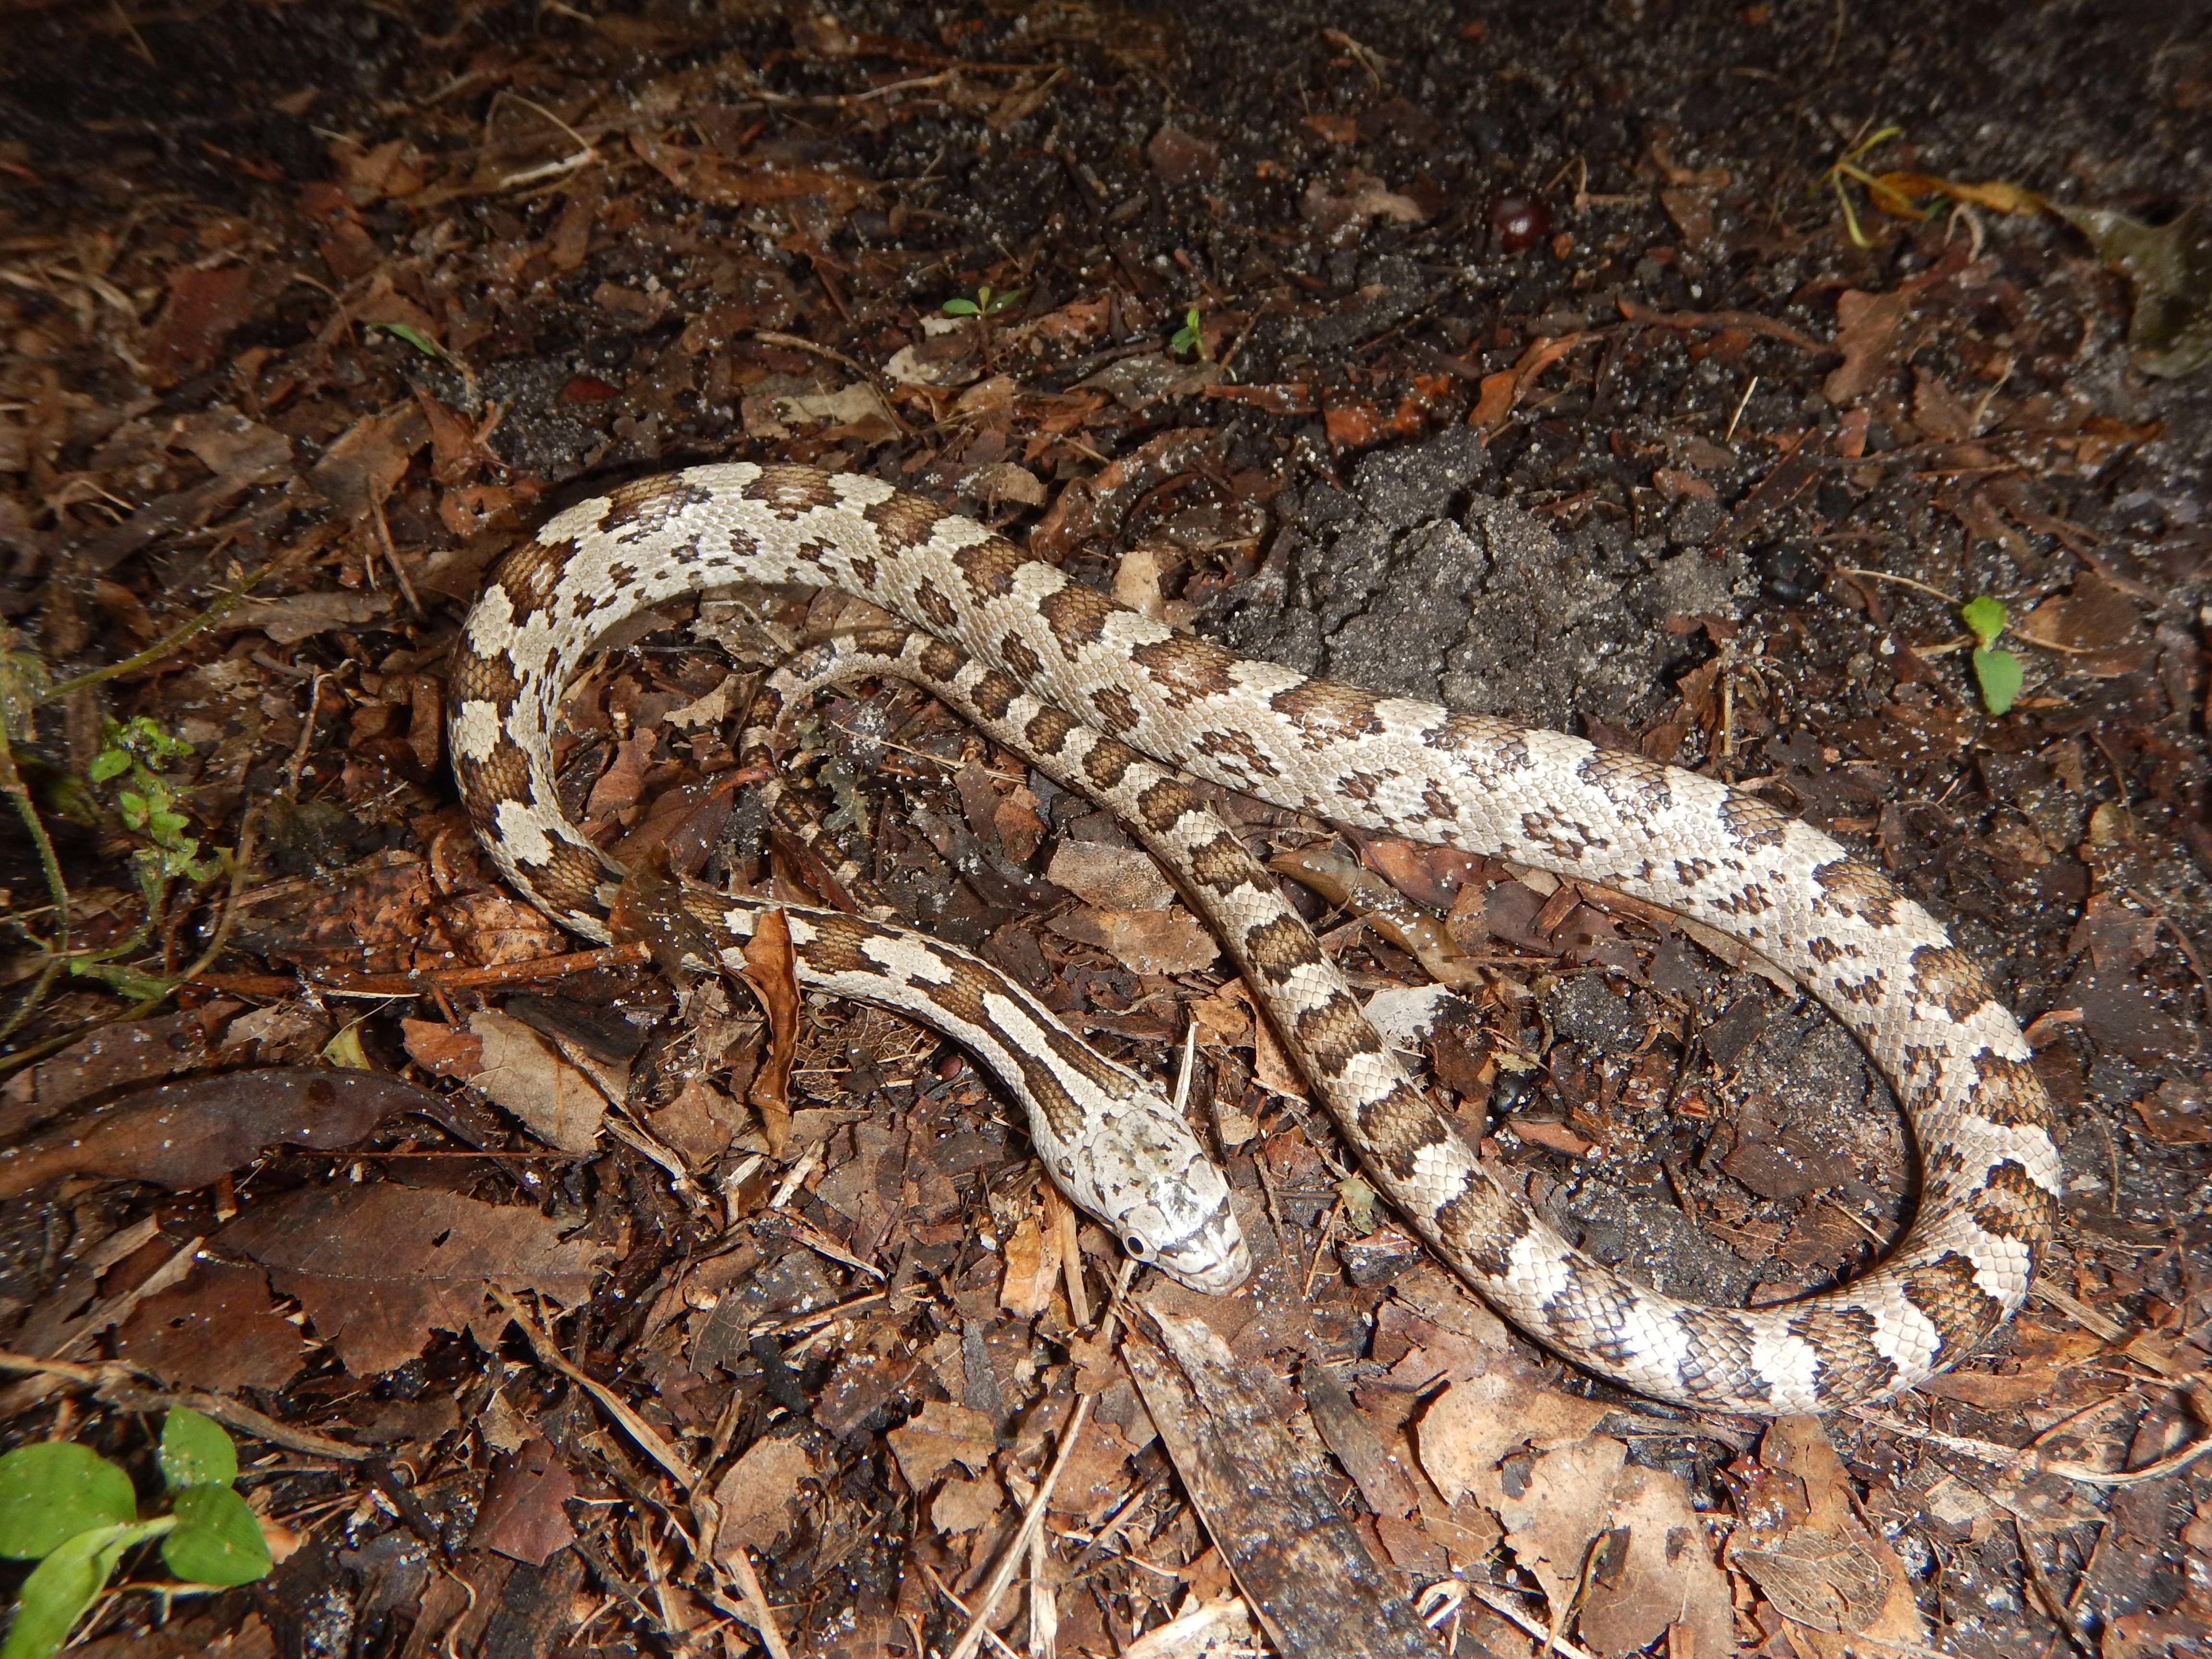 Figure 9. Juvenile yellow rat snake—Markings are typical of juvenile rat snakes.